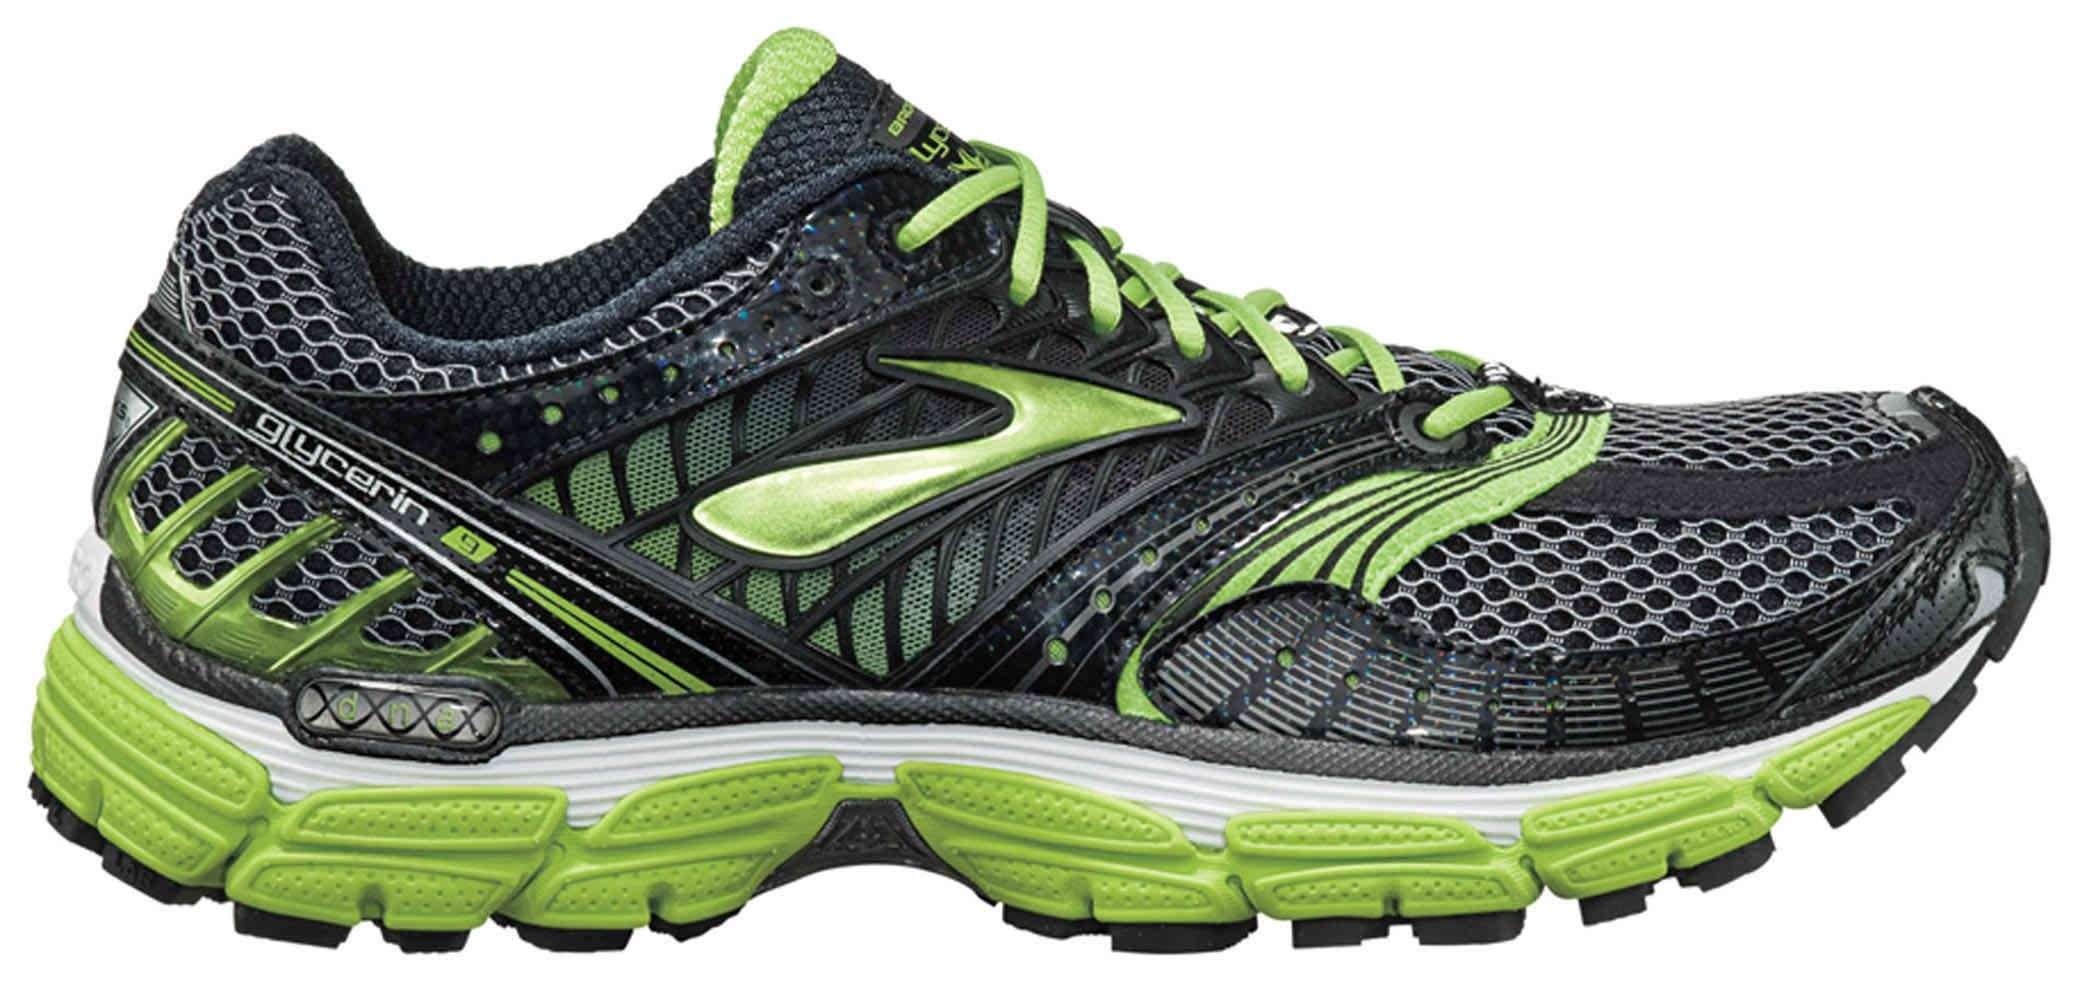 Or should I get these for Jazzercise? Brooks Glycerin 9 ...